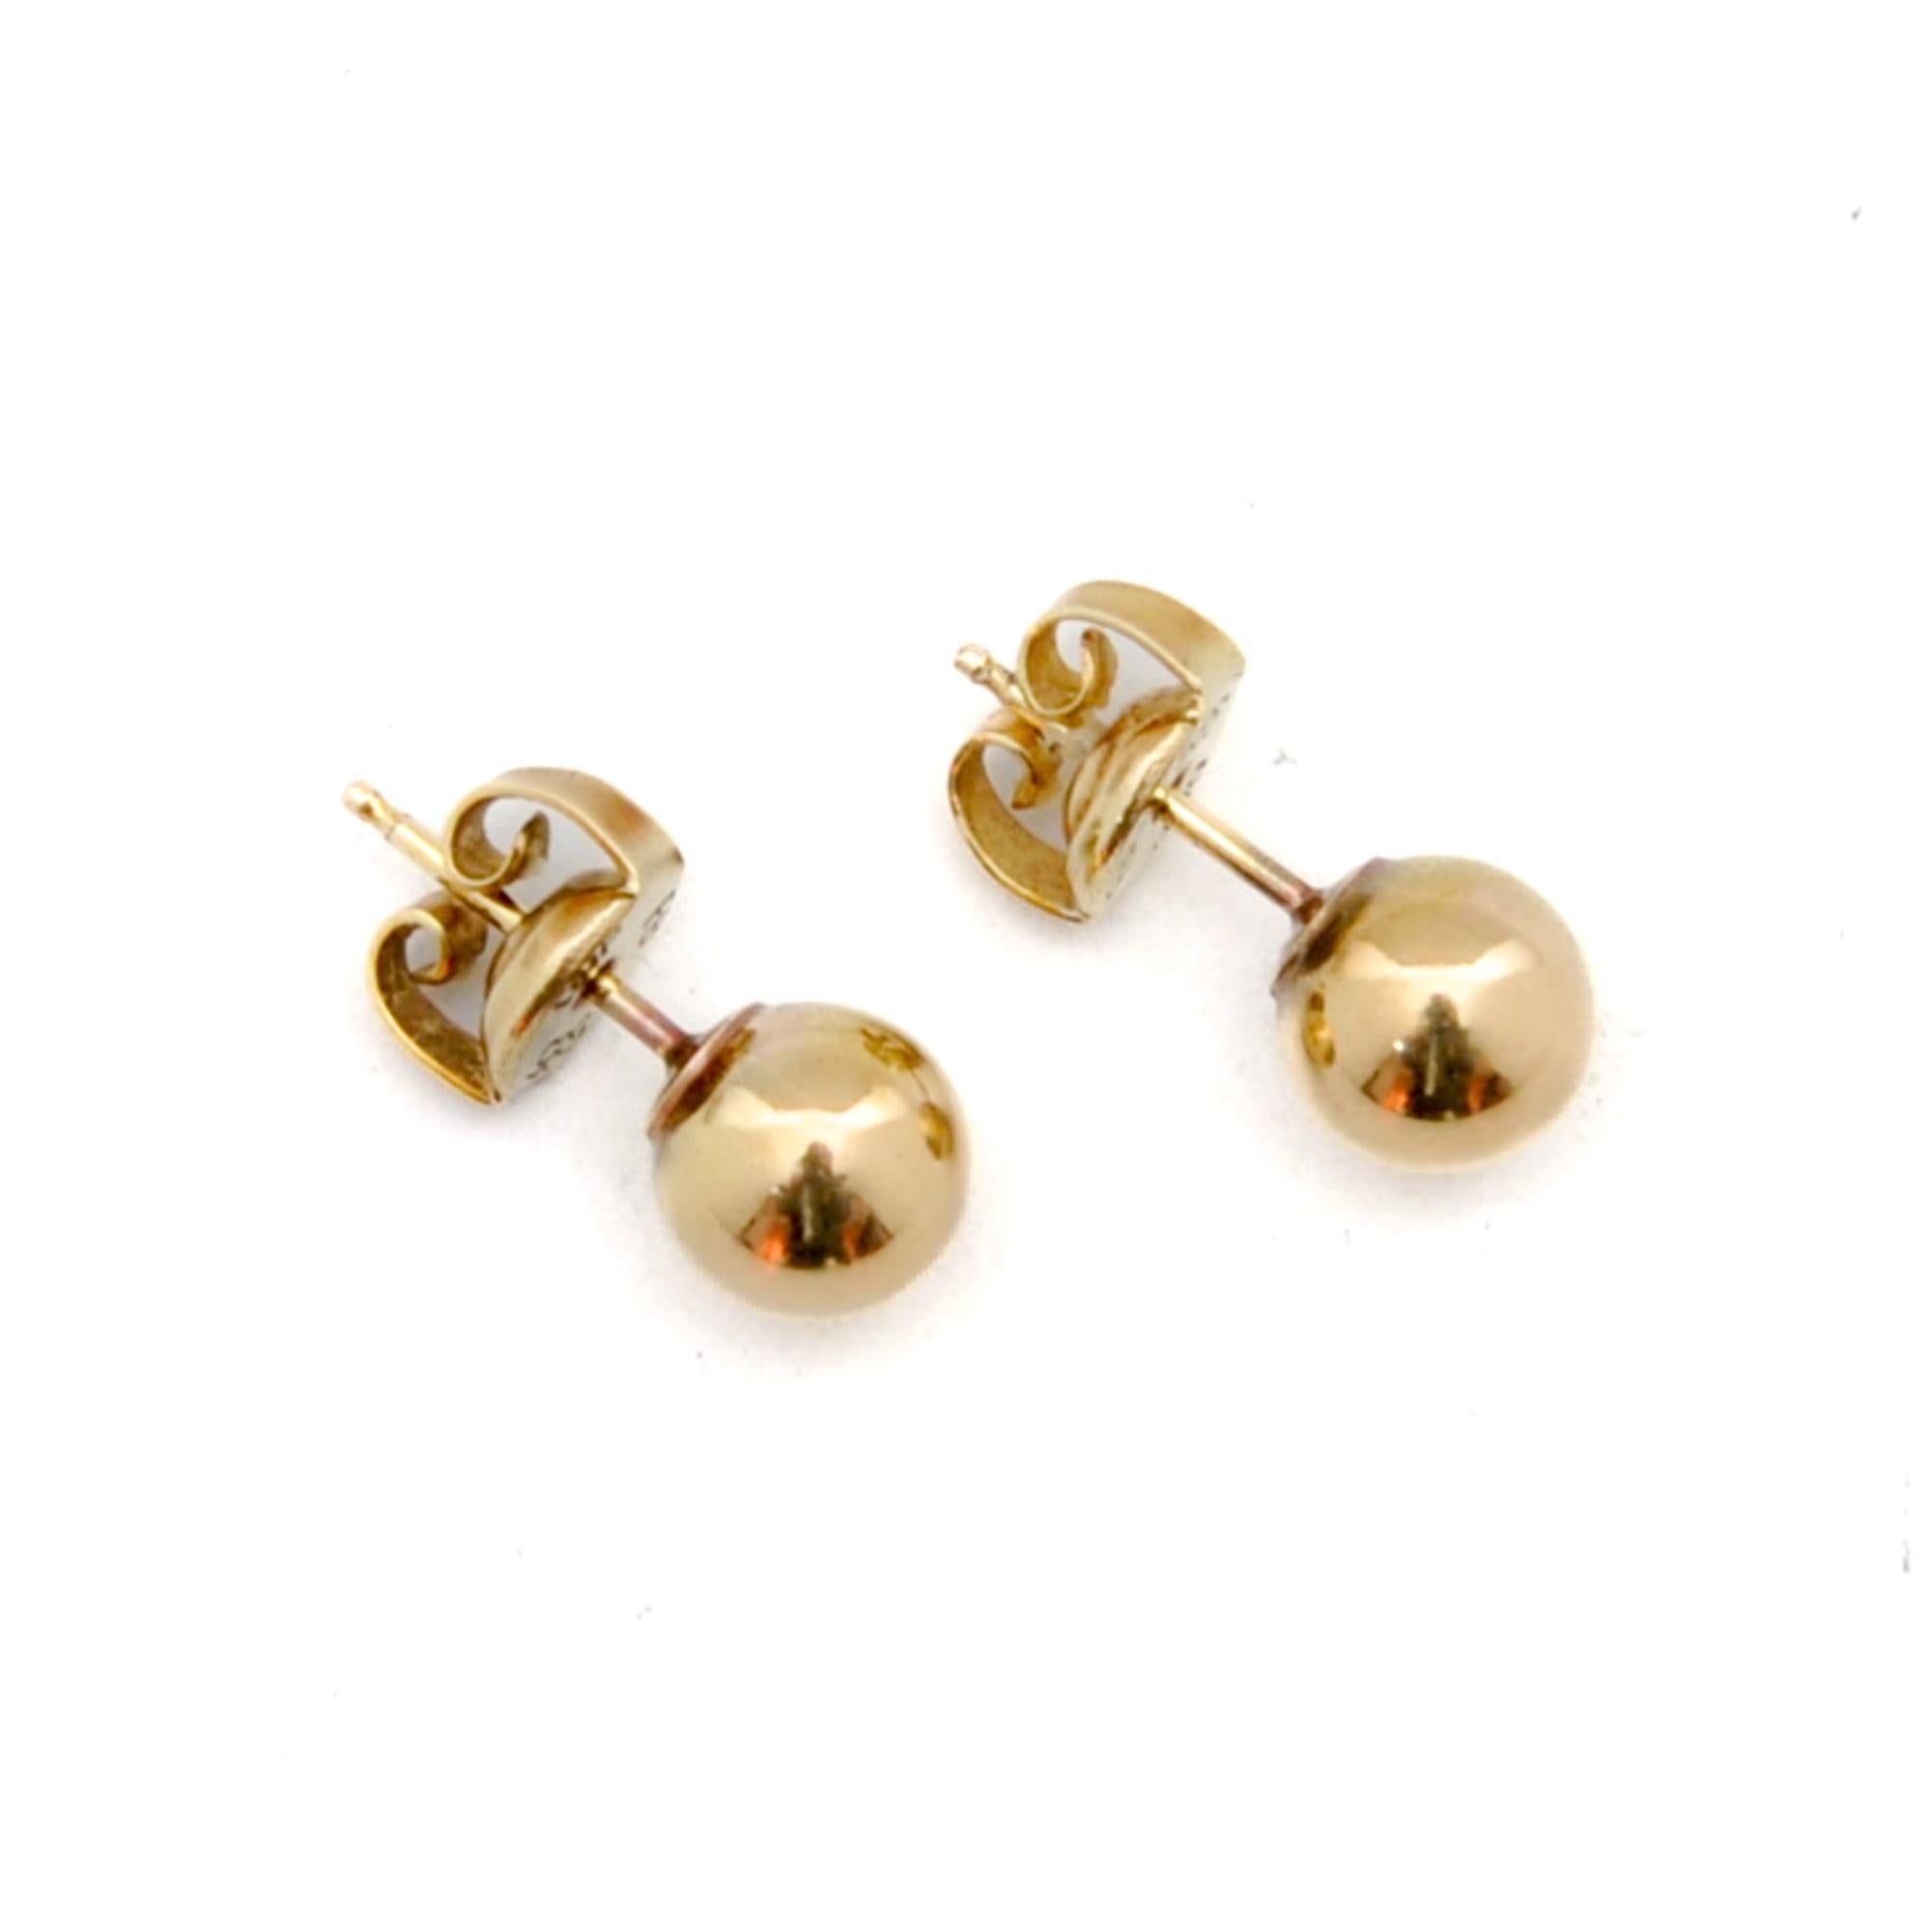 A beautiful vintage pair of classic round gold ball stud earrings. The smooth polished design of these round balls are created in 14 karat gold. The gold stud earrings are provided with a push back closure. The push backs are stamped with the 585